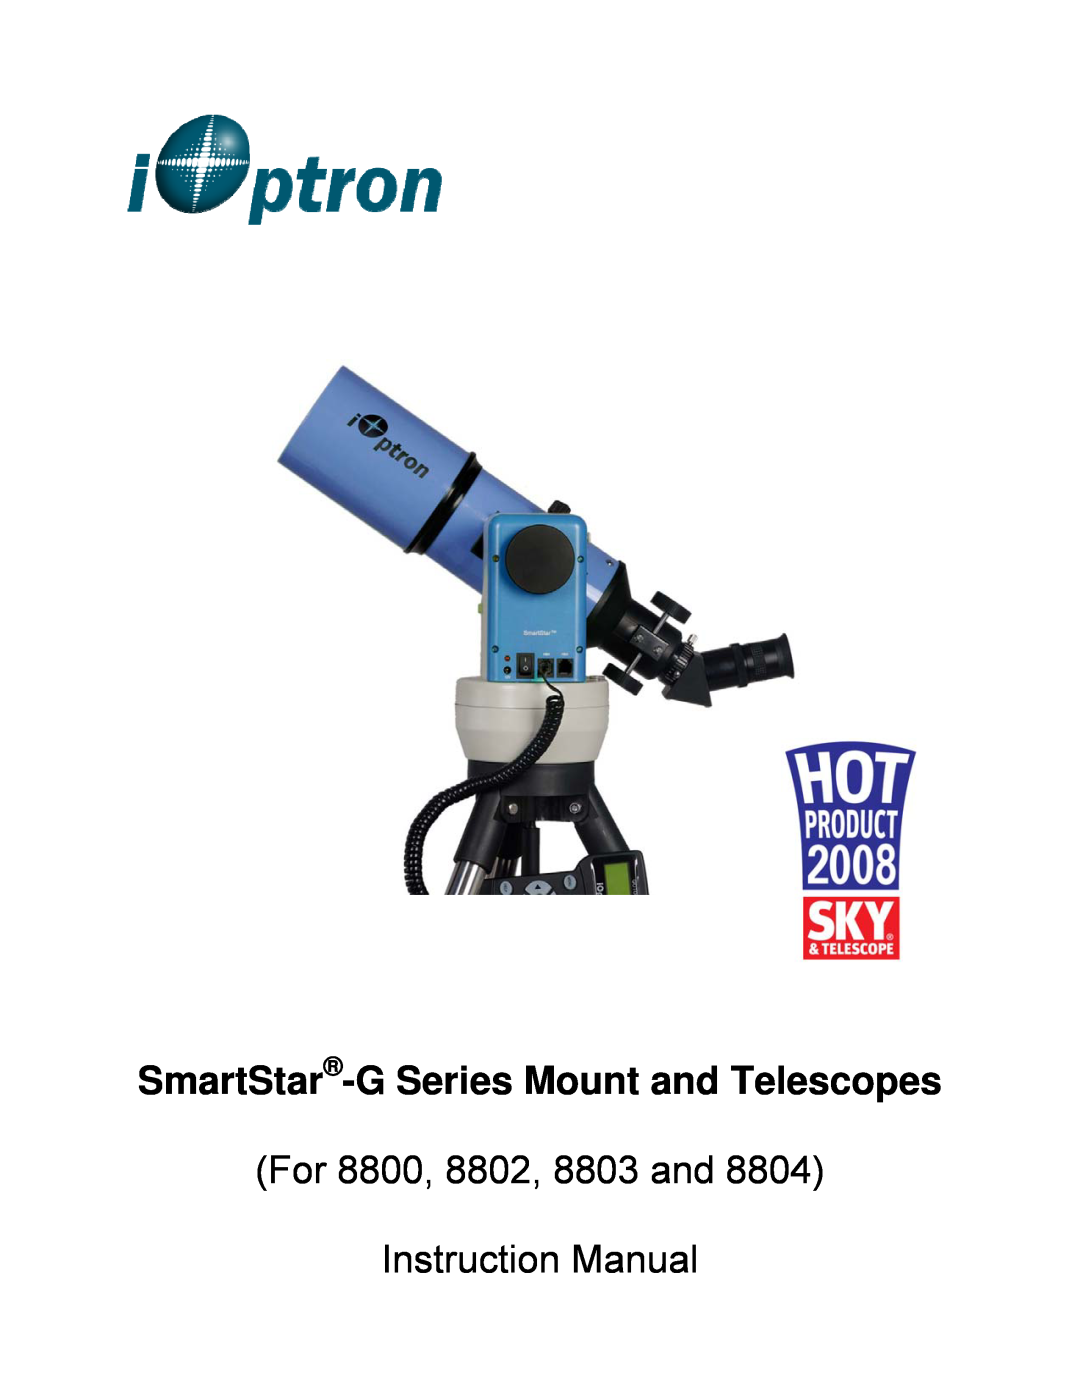 iOptron G-MC90 instruction manual SmartStar-GSeries Mount and Telescopes, For 8800, 8802, 8803 and Instruction Manual 